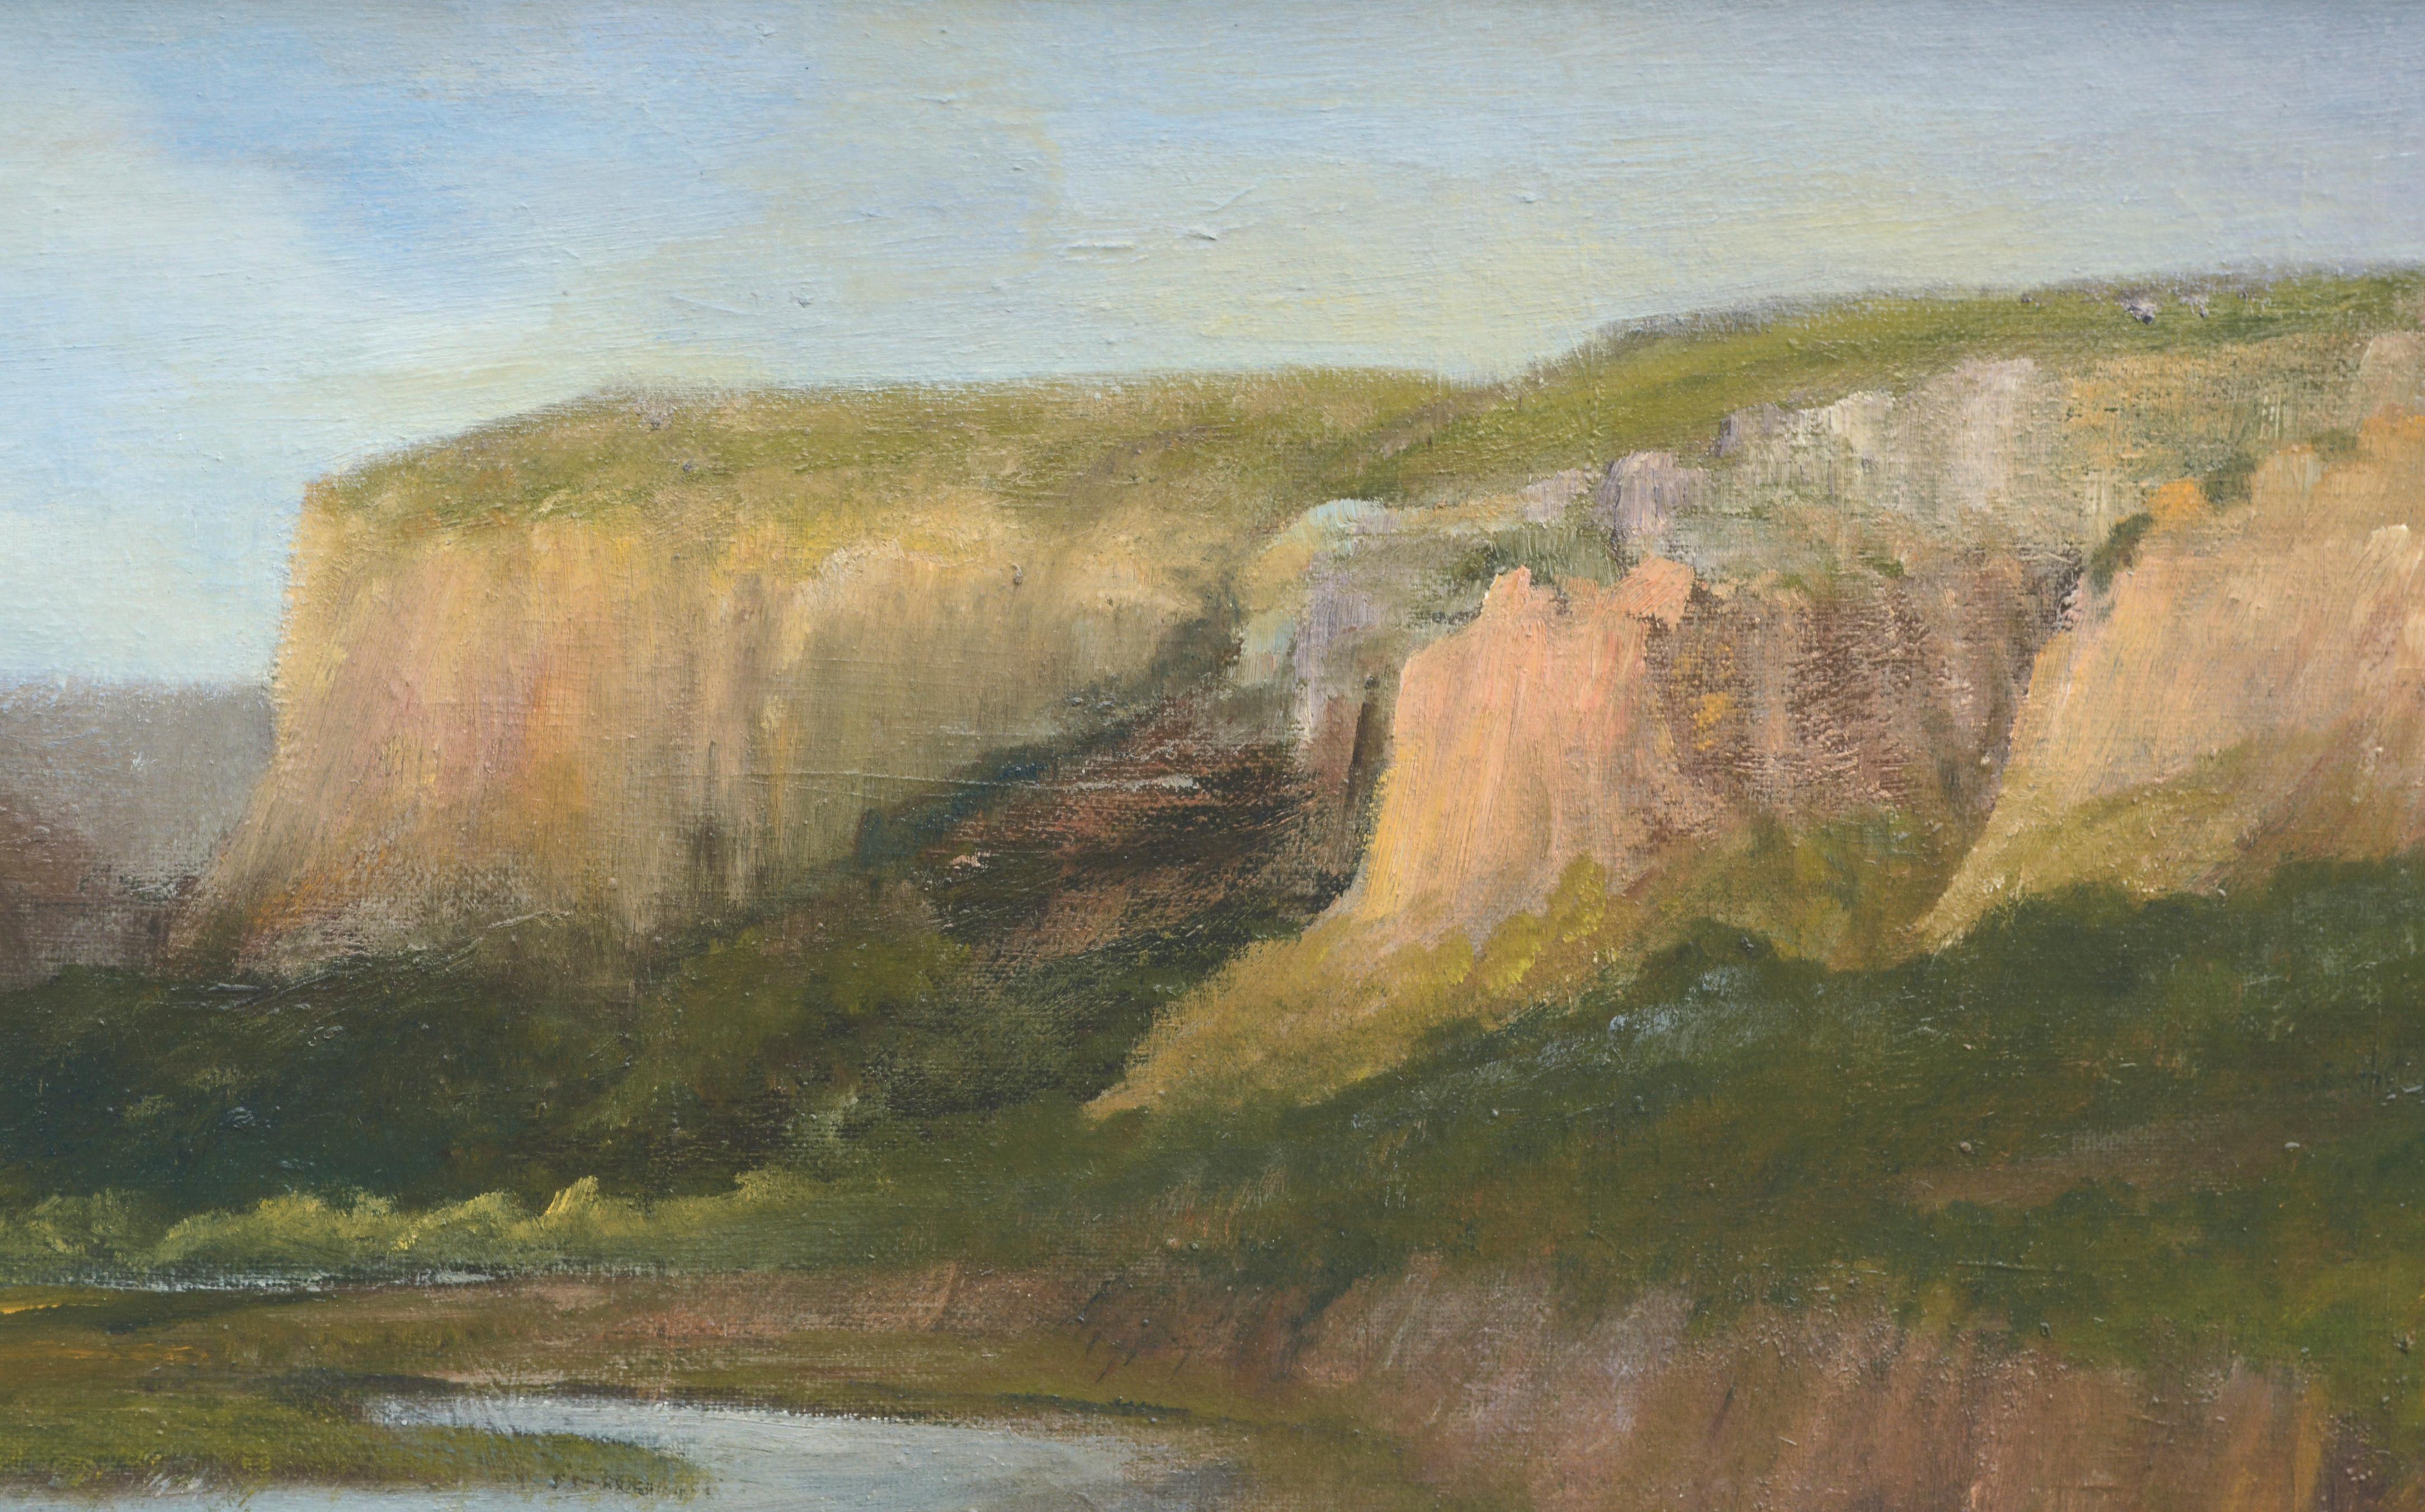 The River Mouth - Landscape - American Impressionist Painting by Kenneth Lucas